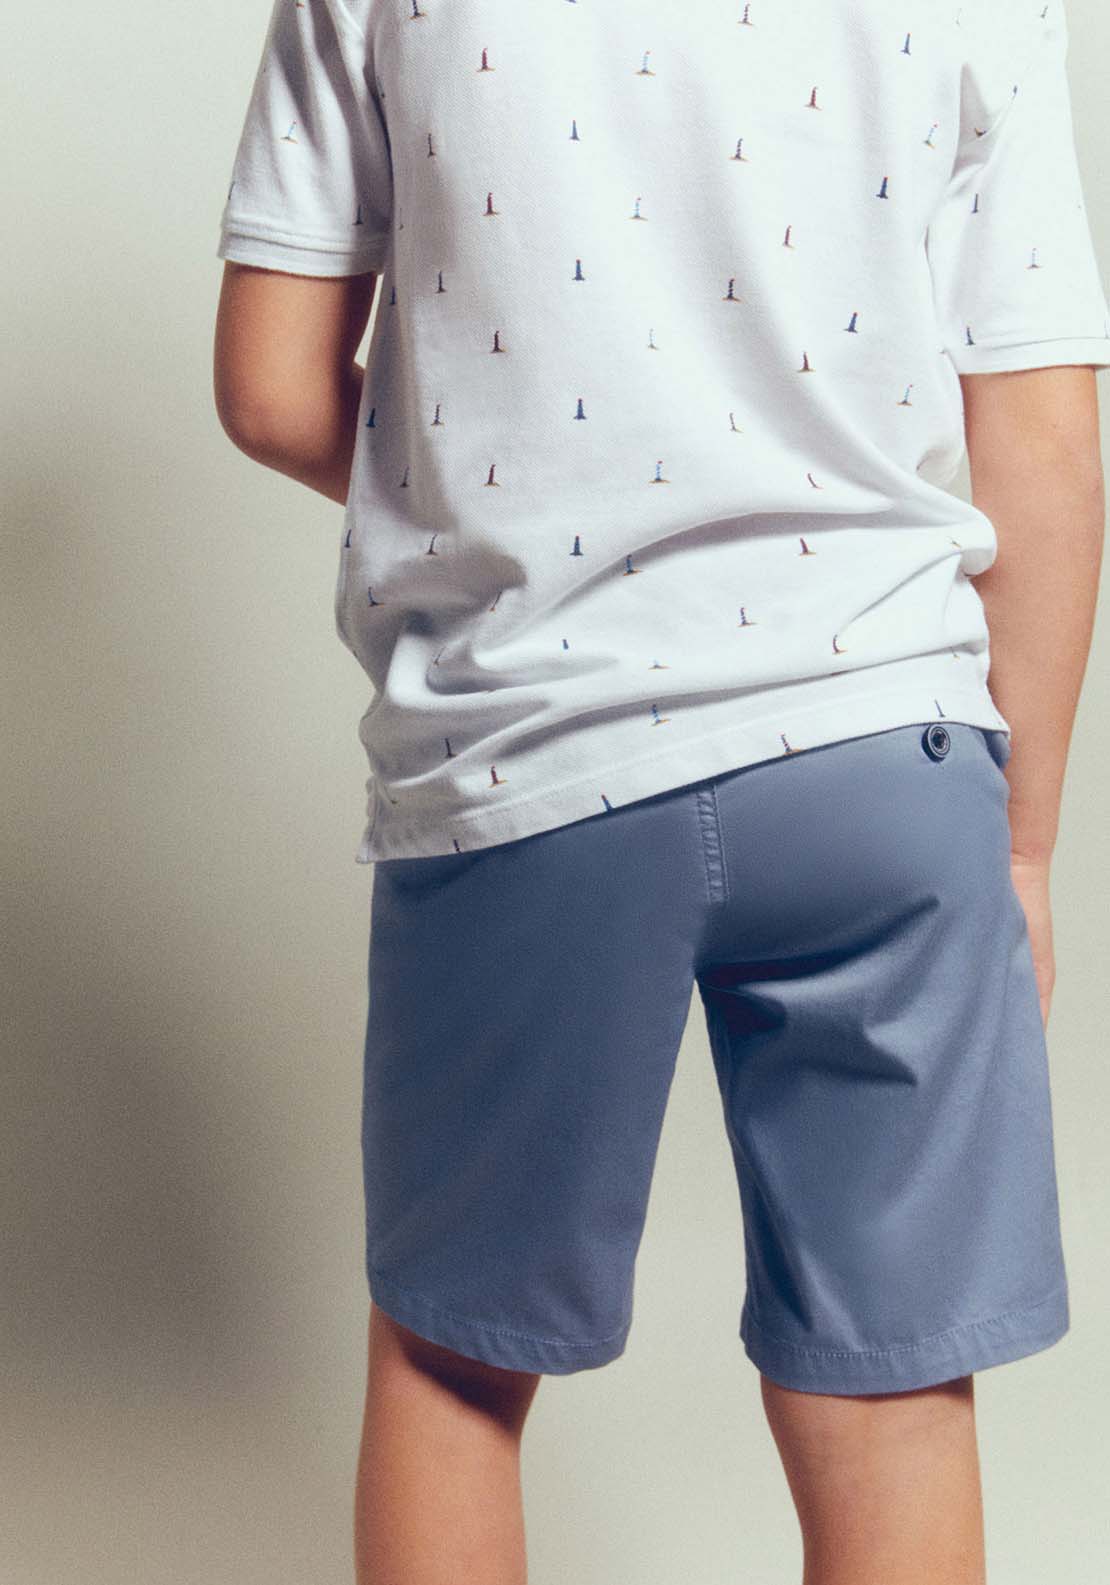 Sfera Formal Shorts With Belt - Blue 2 Shaws Department Stores